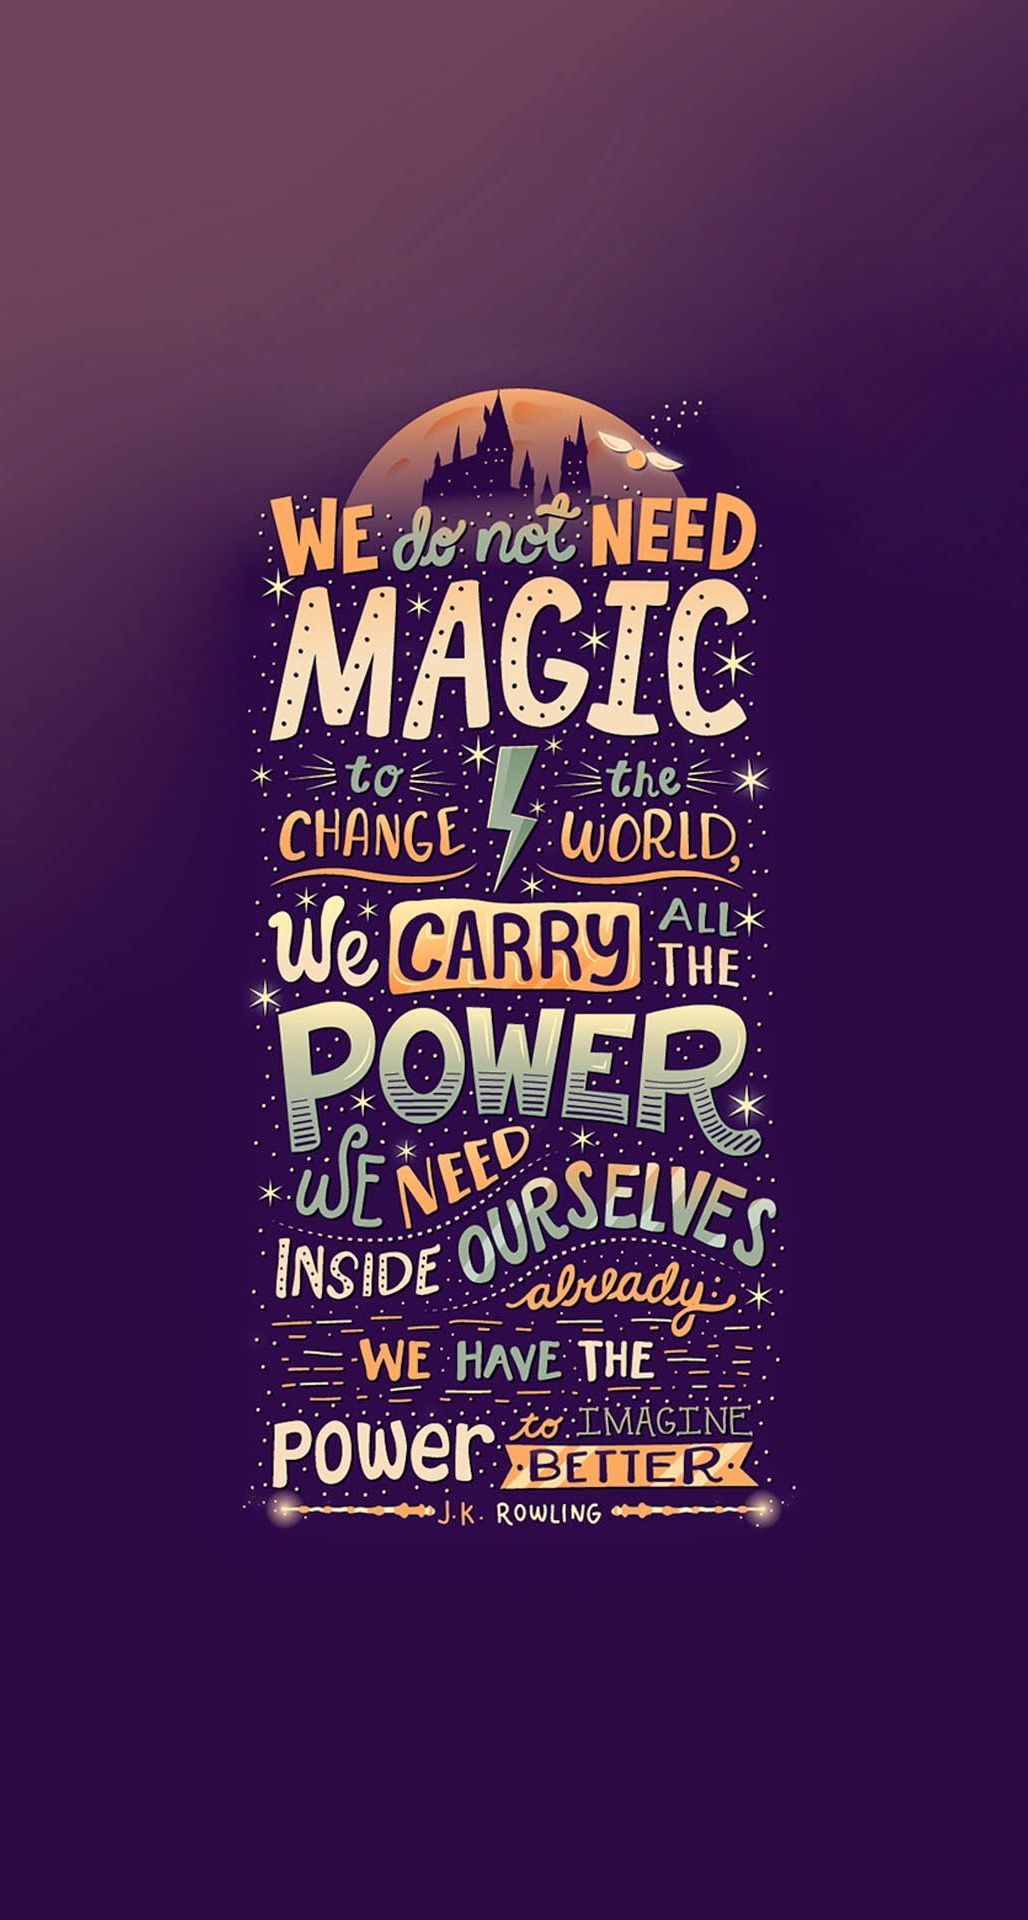 Harry Potter Quotes iPad Wallpaper Free Harry Potter Quotes iPad Background